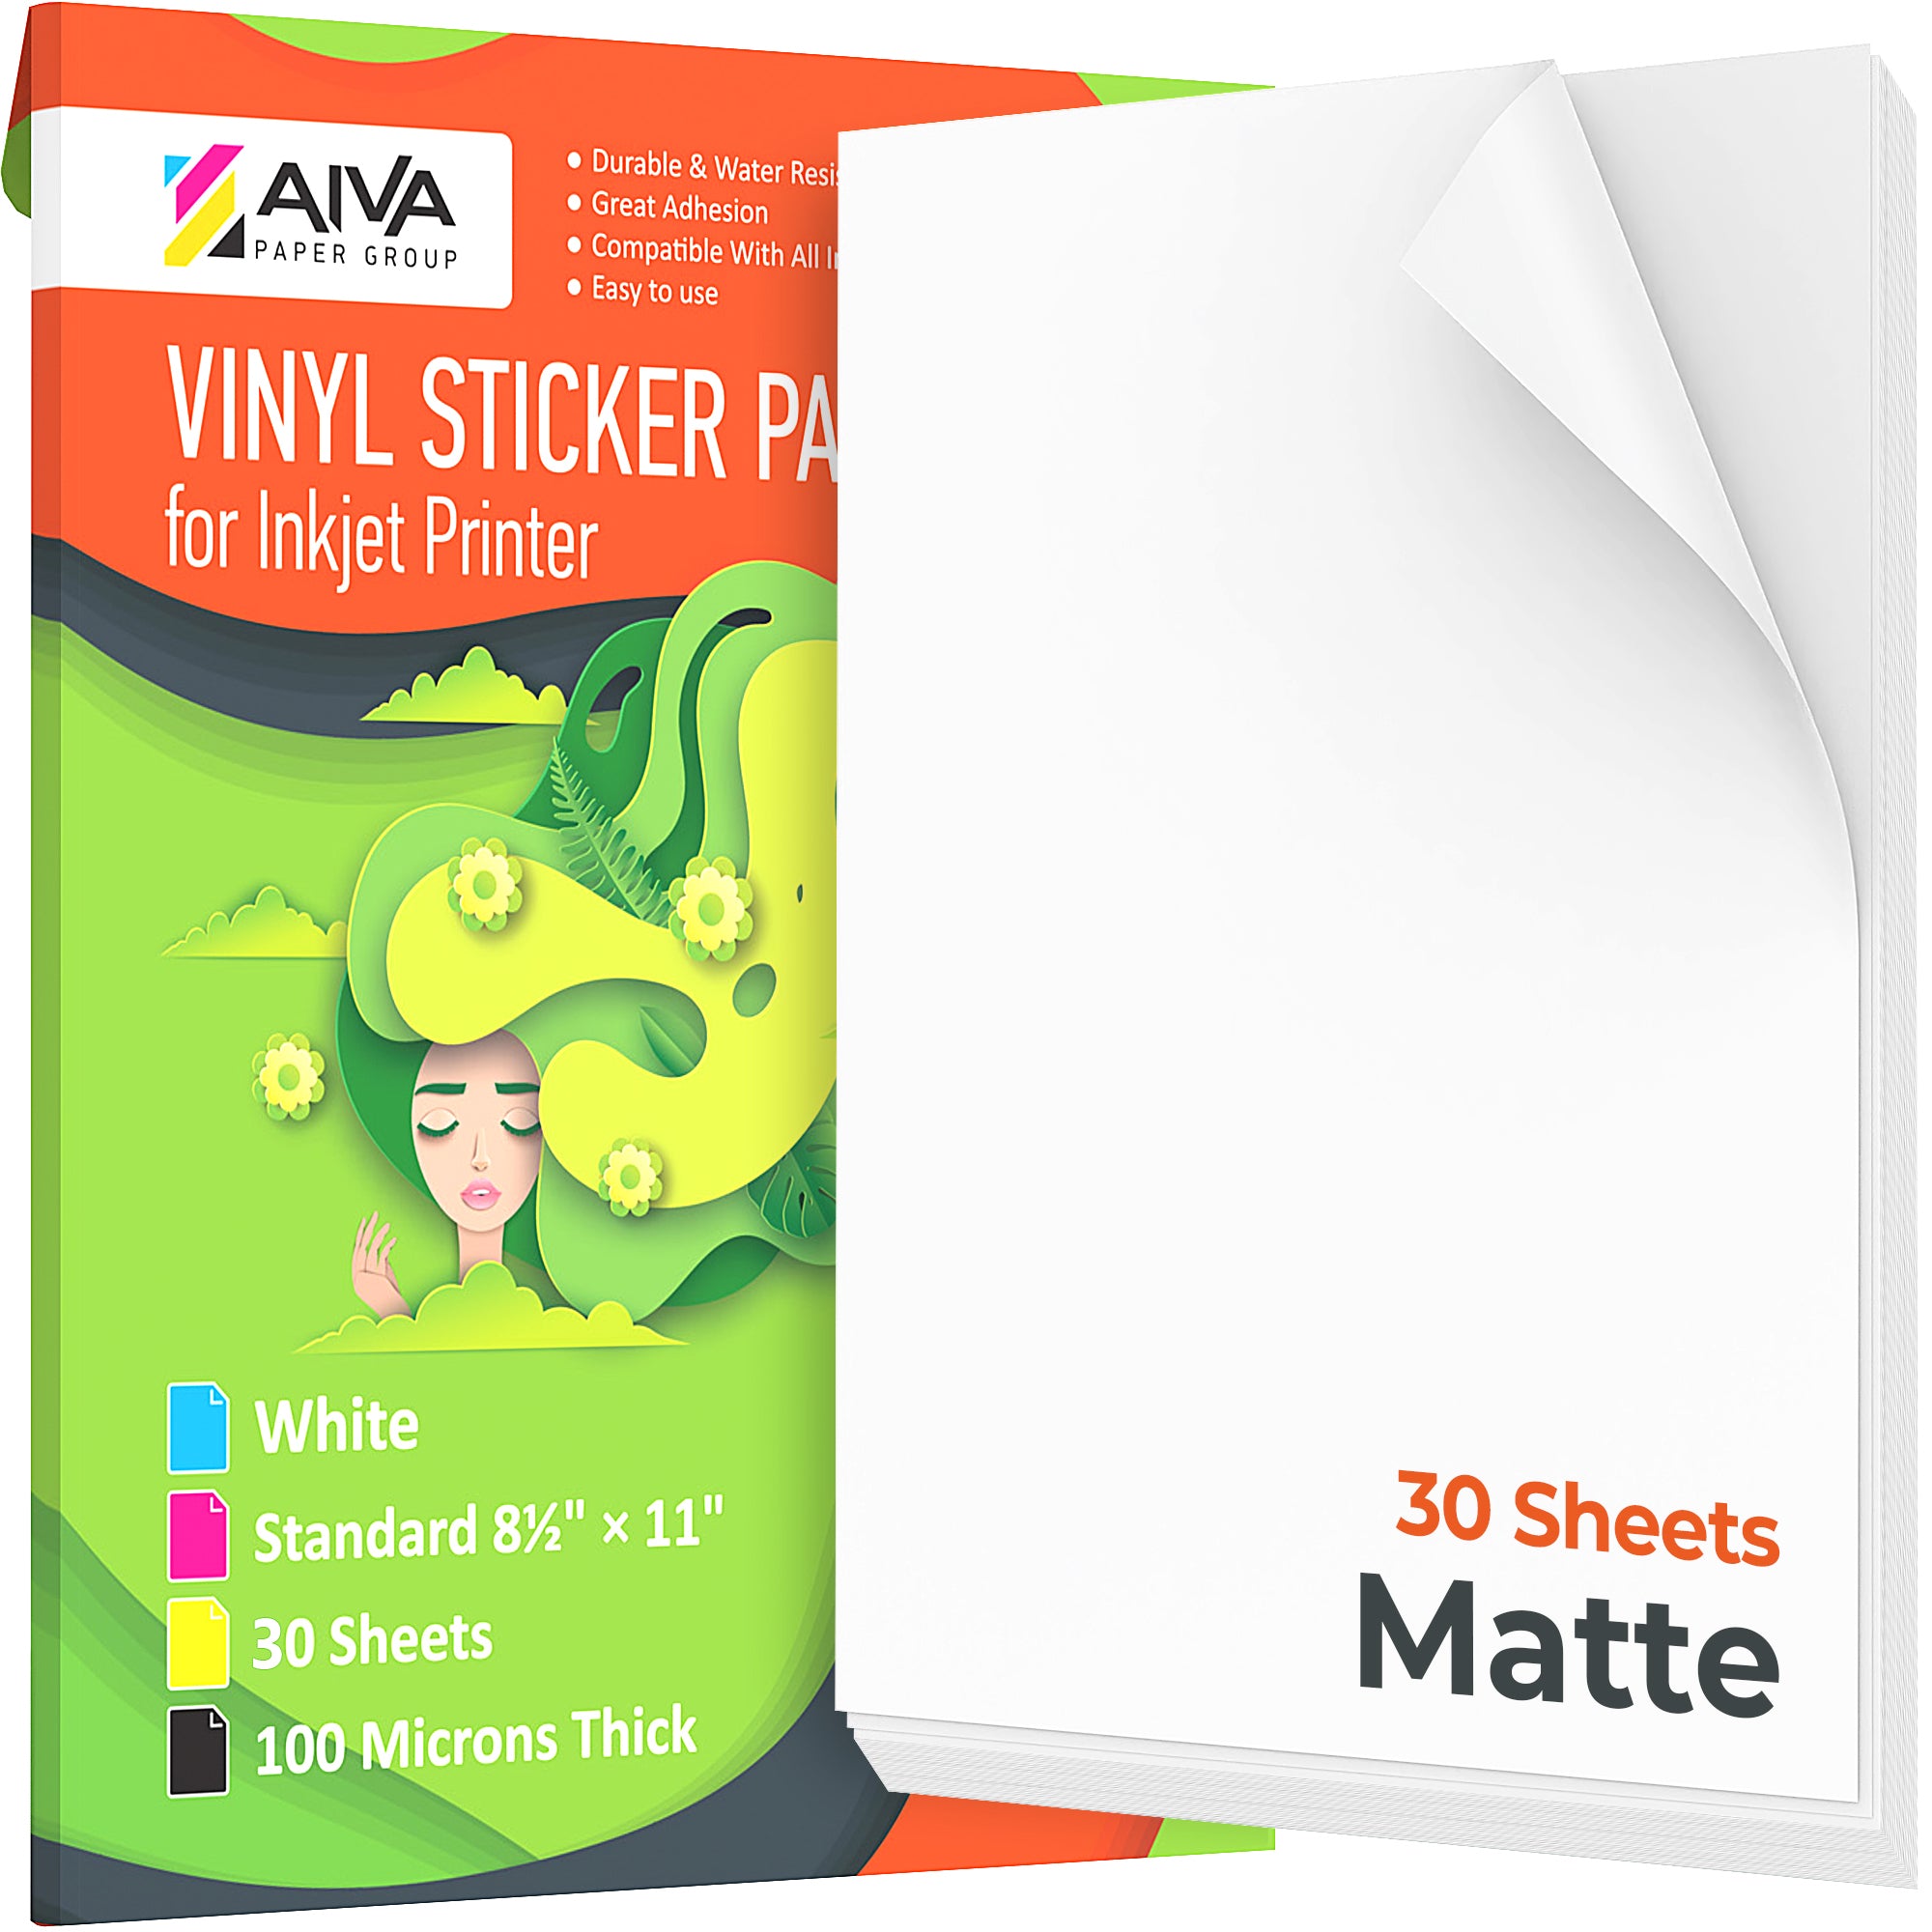 The Best Vinyl Paper For Stickers (Tips from a Professional